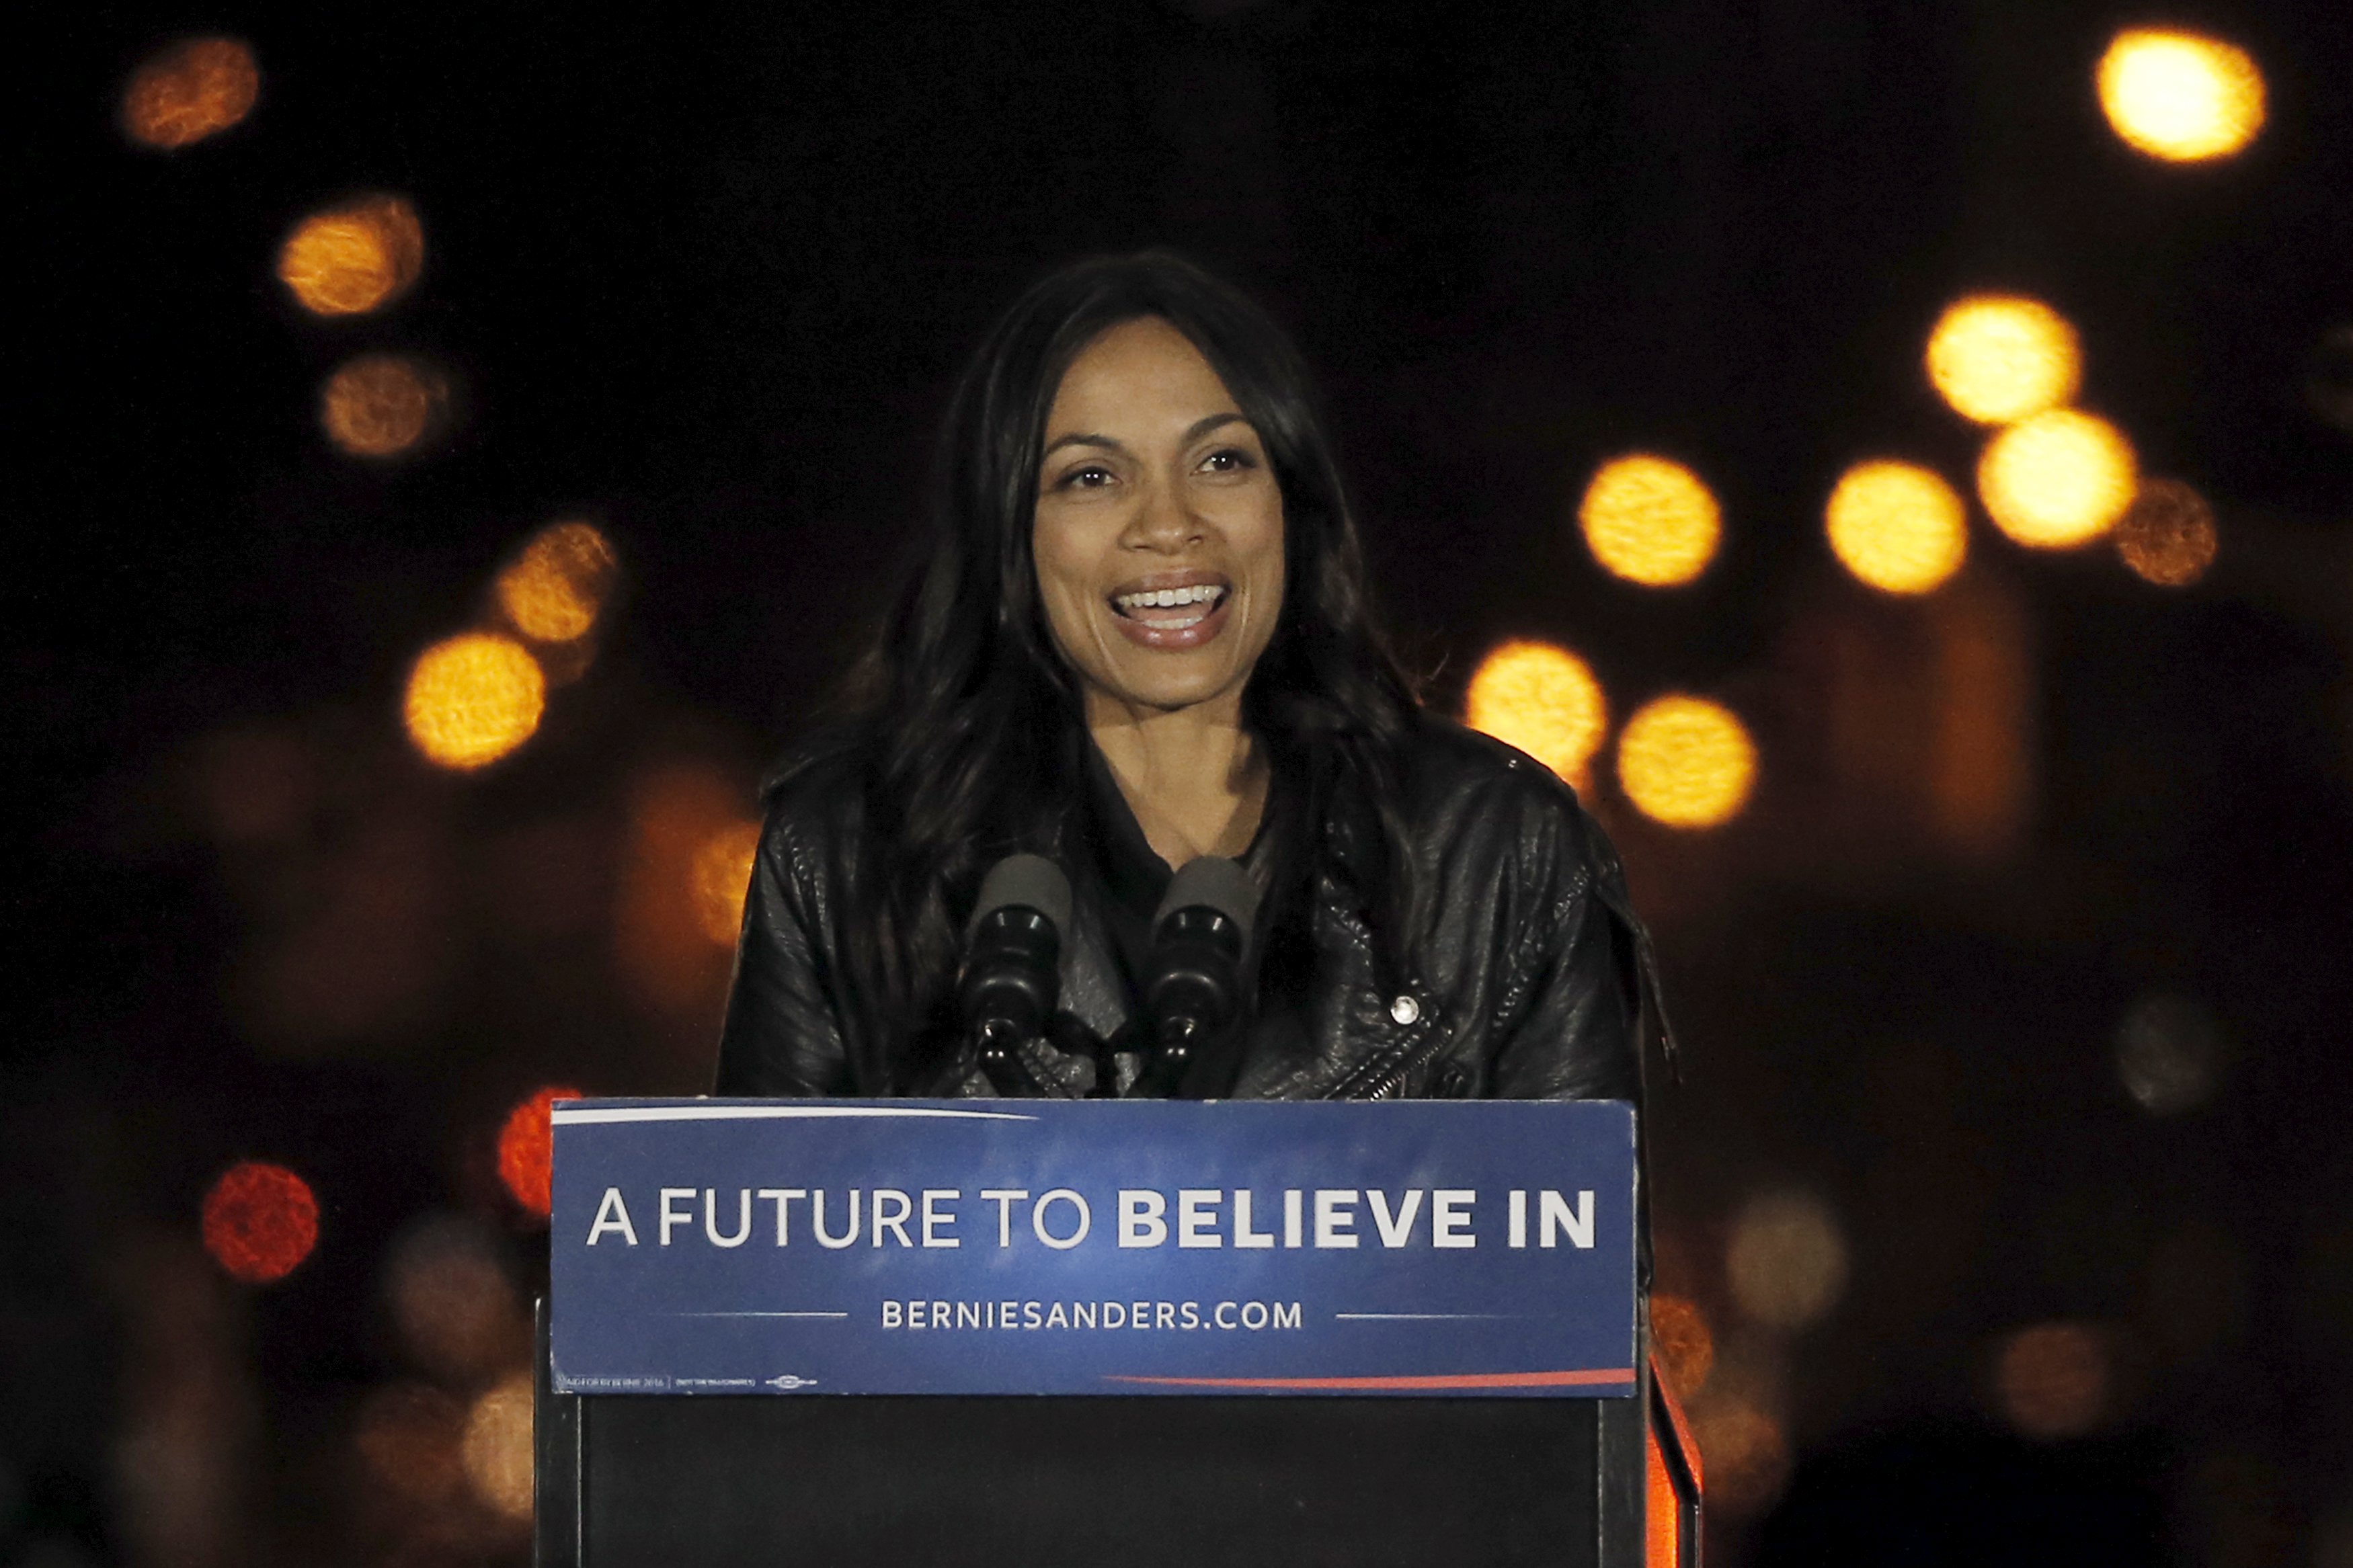 Actress Rosario Dawson speaks at a campaign rally for U.S. Democratic presidential candidate Bernie Sanders in Washington Square Park in the Greenwich Village neighborhood of New York City, April 13, 2016.